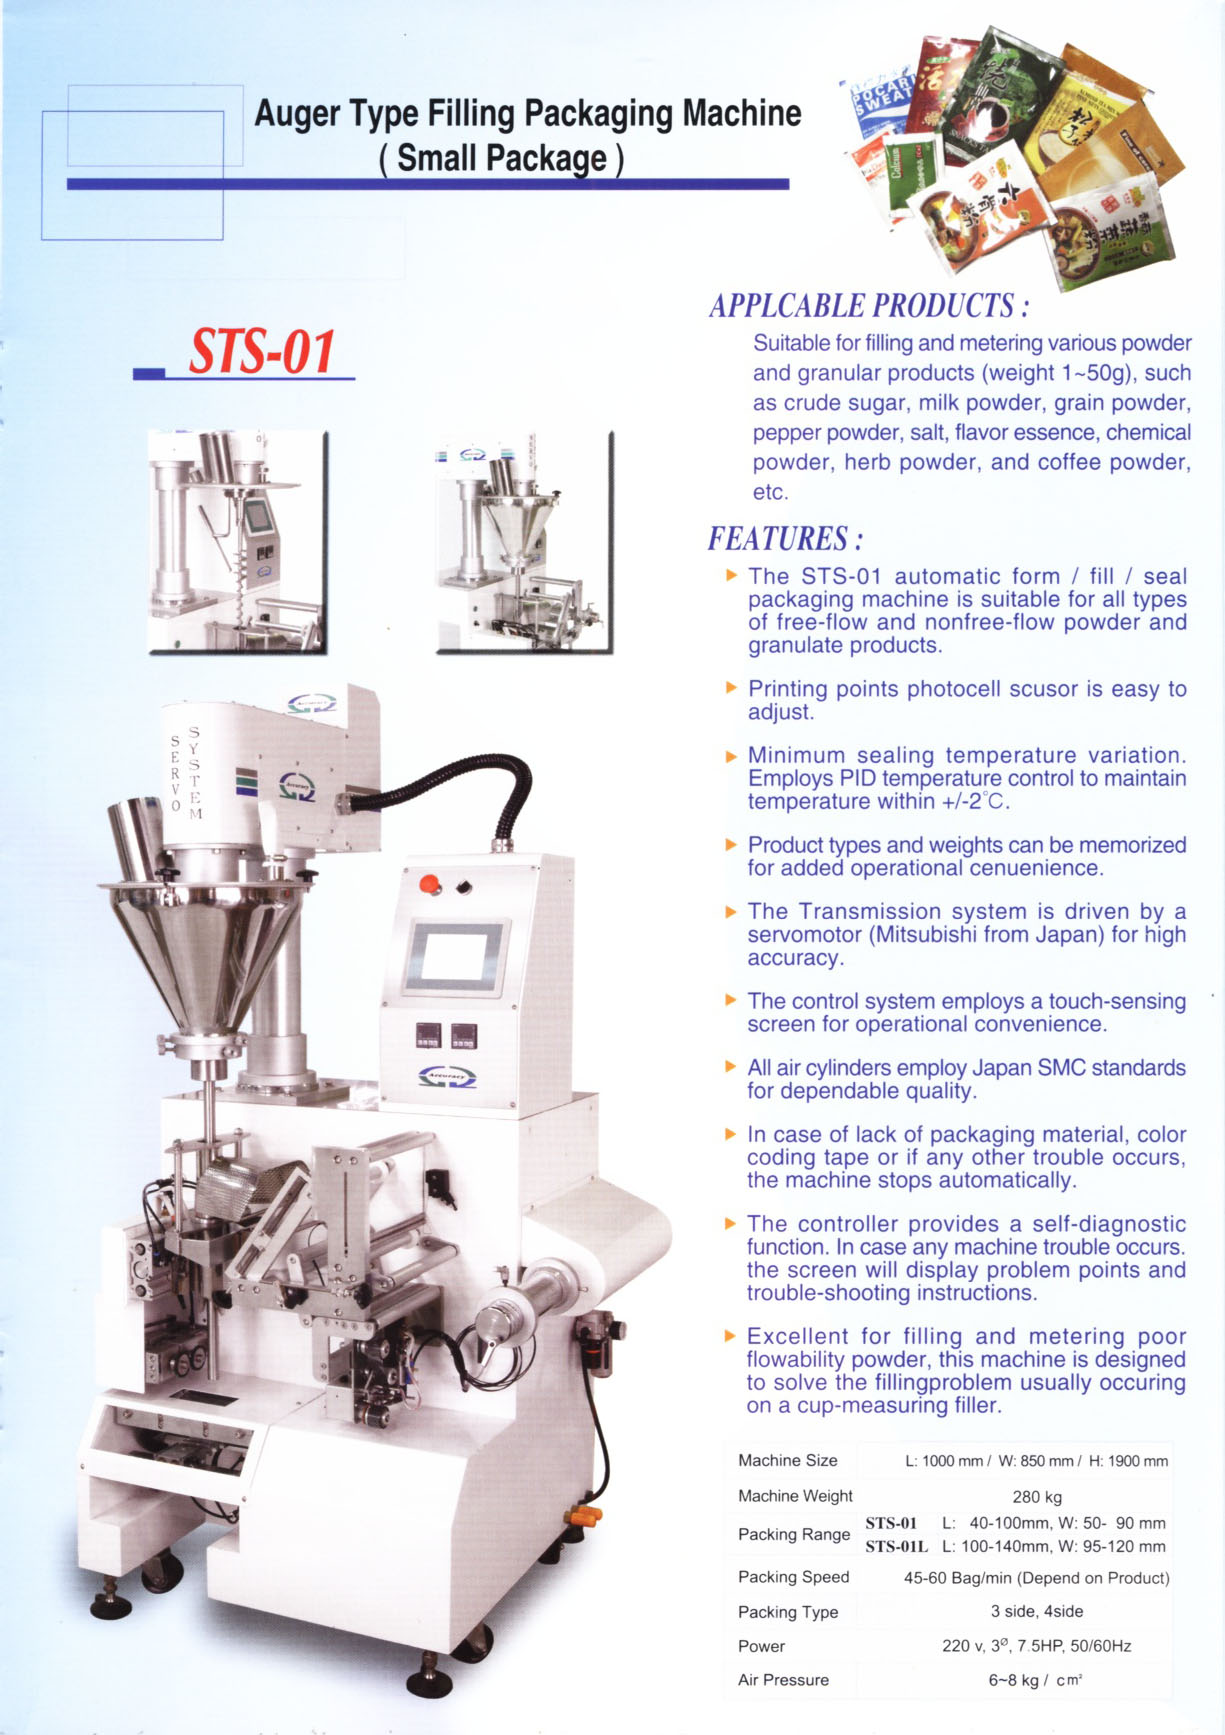 Auger Type Filling Packaging Machine